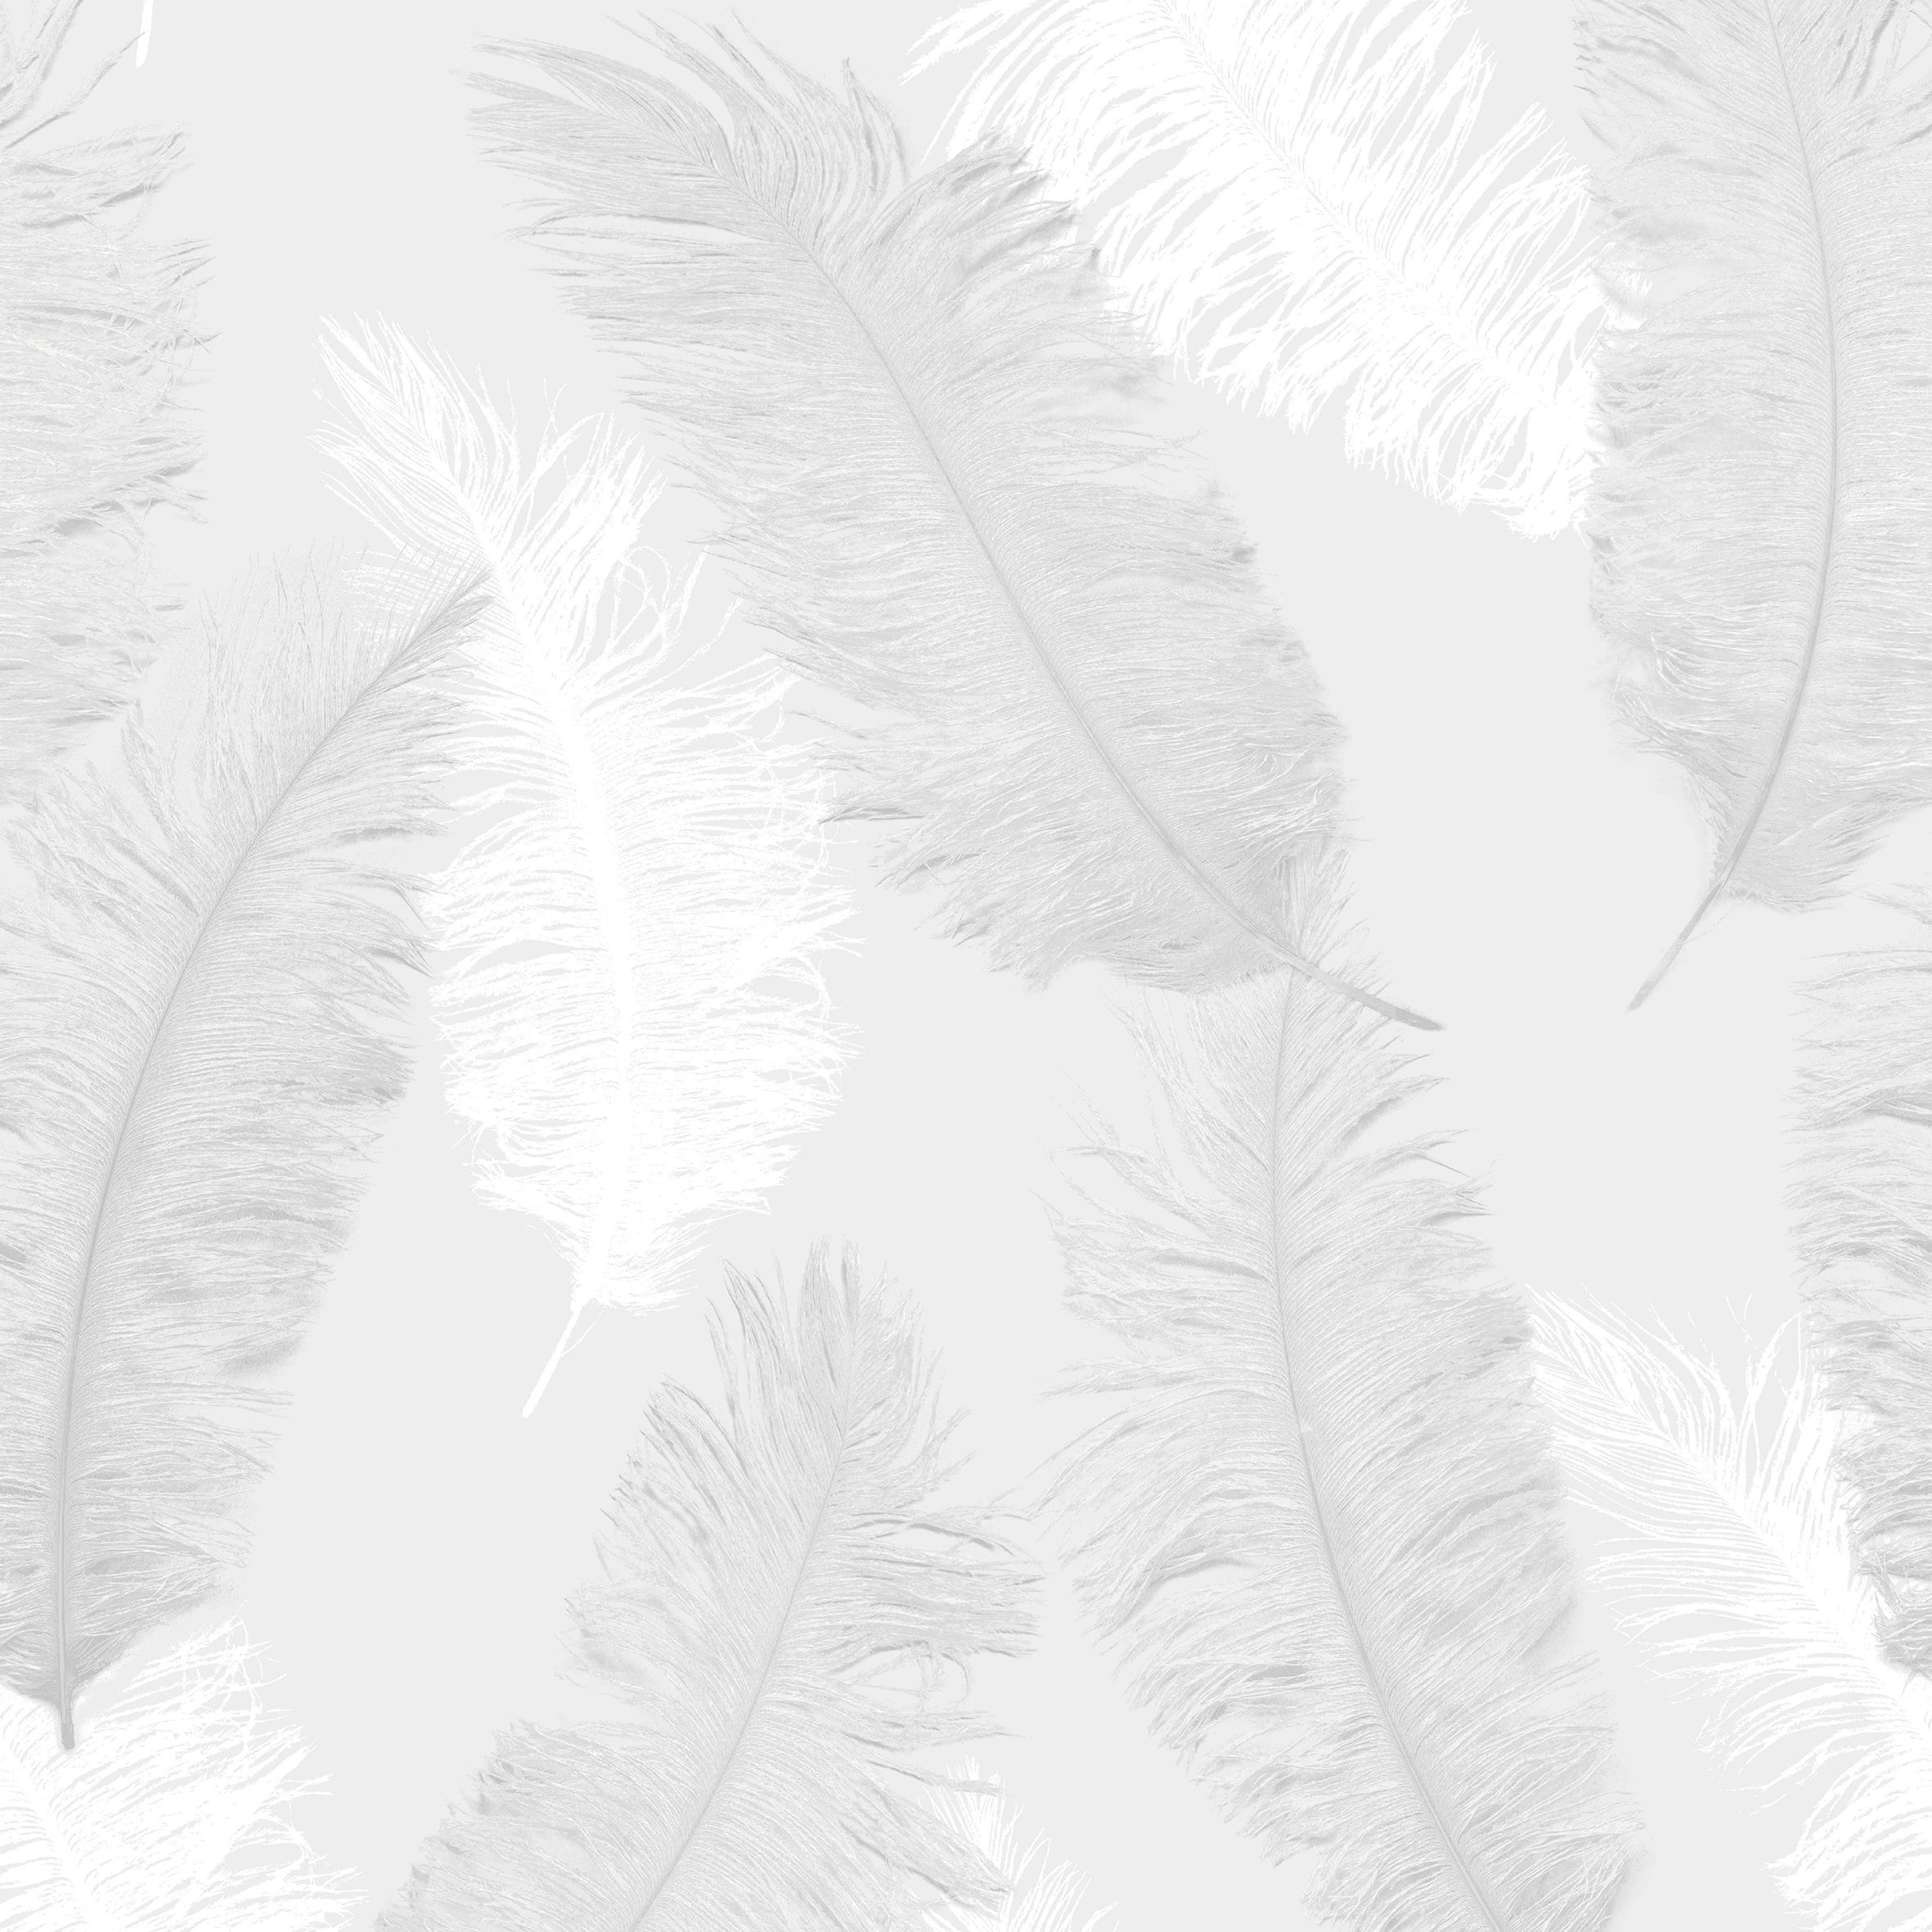 Feather Wallpaper Free Feather Background